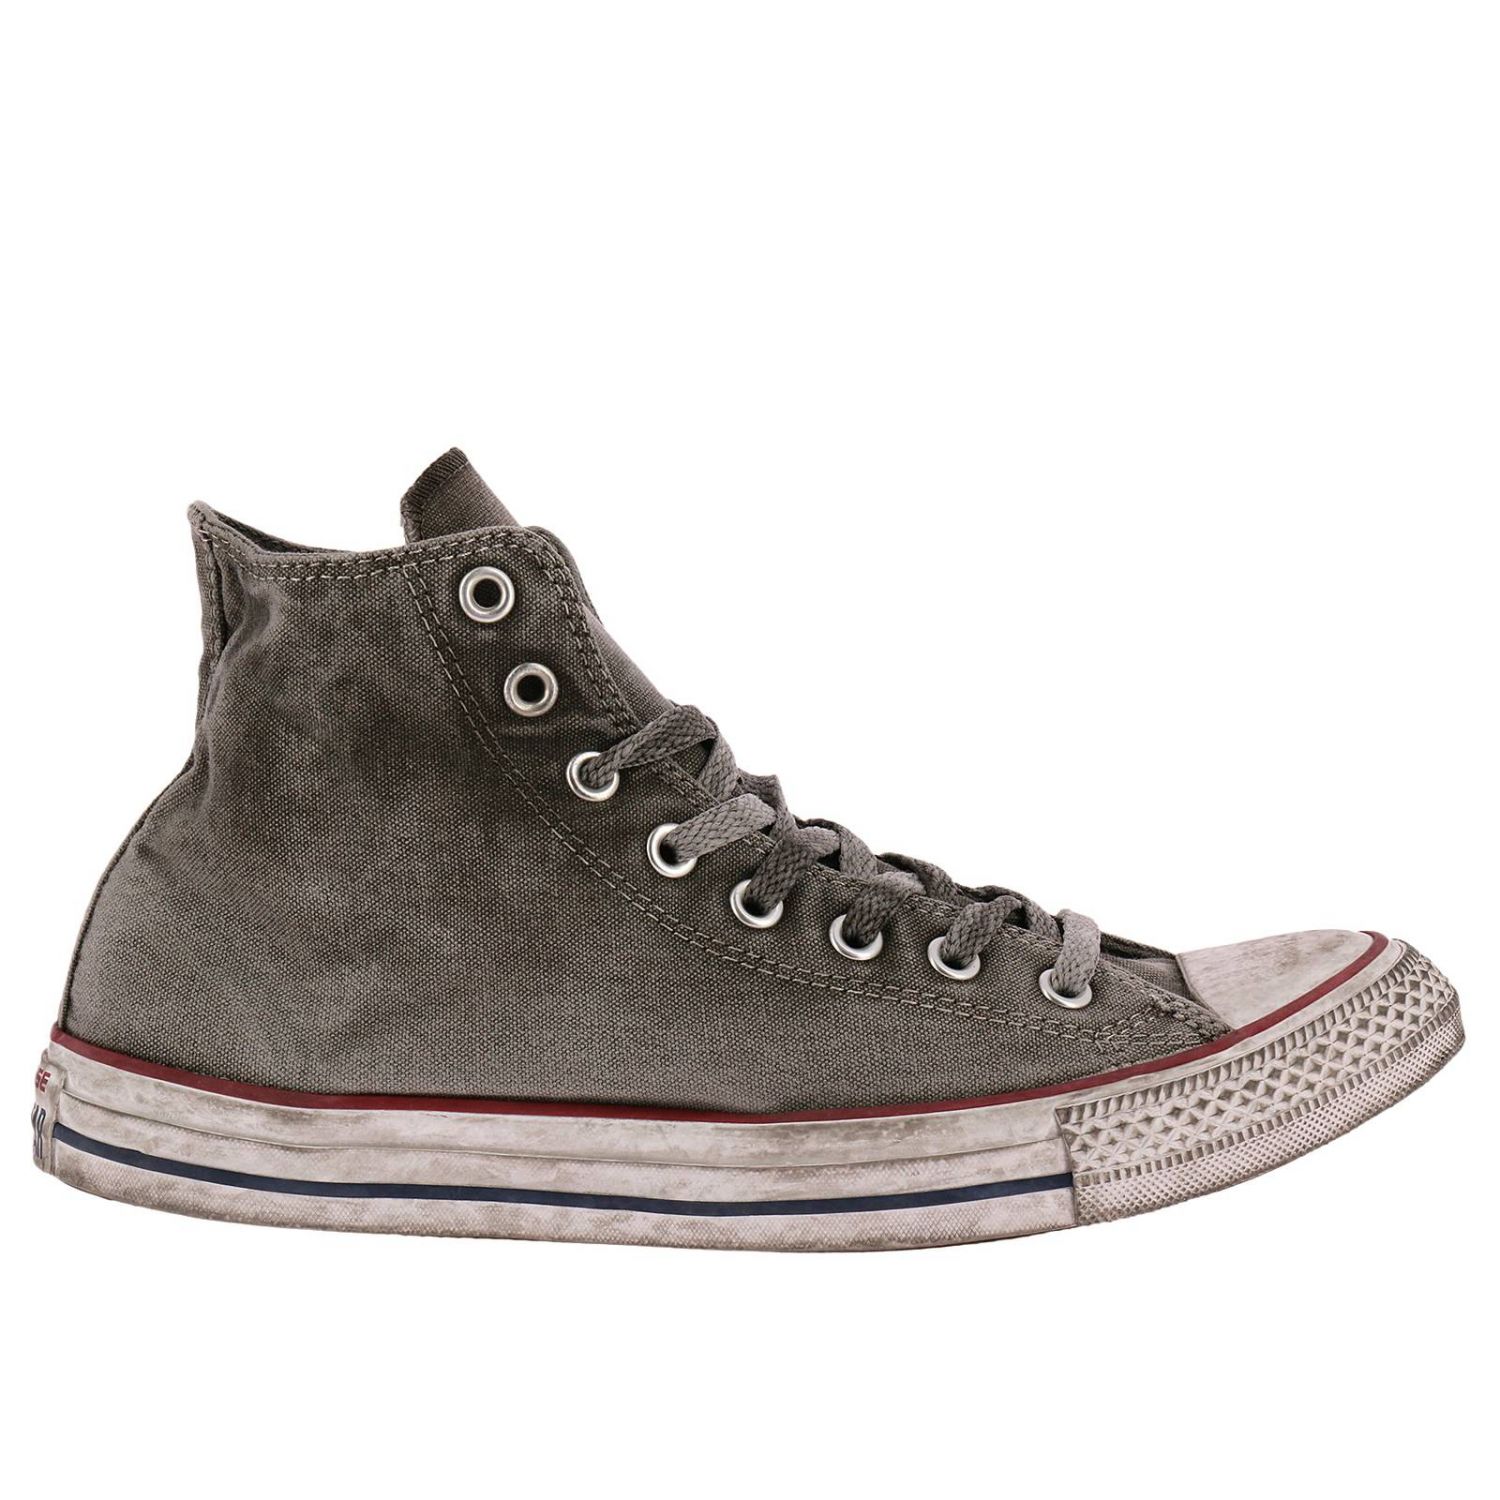 Sneakers All Star Limited Edition in canvas effetto denim used | Sneakers Converse  Limited Edition Uomo Grigio | Sneakers Converse Limited Edition 156885C  Giglio IT